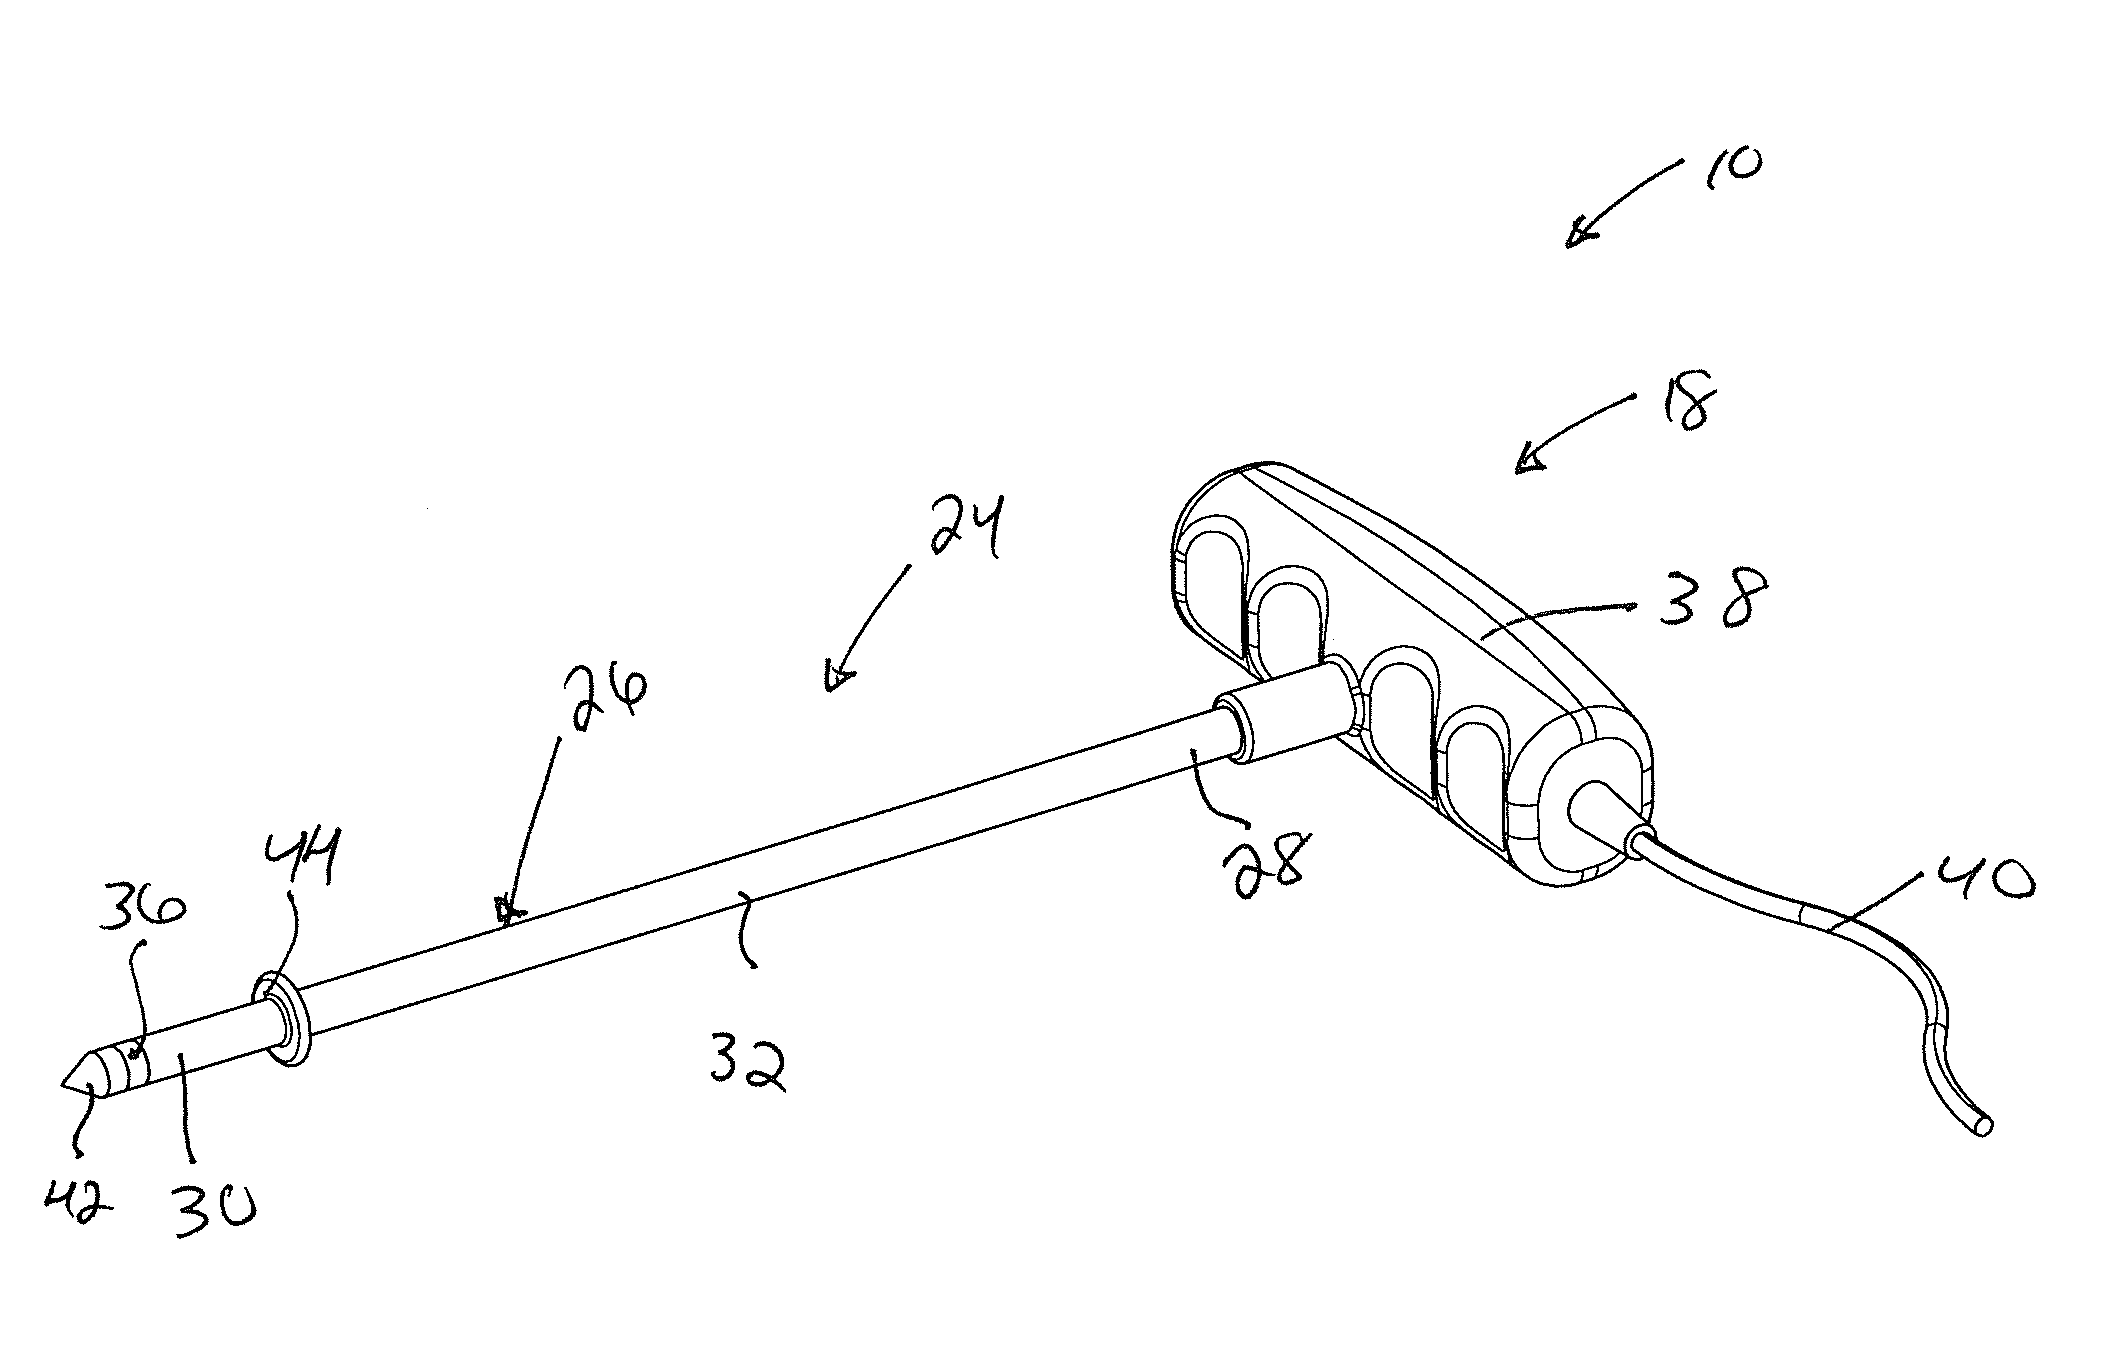 Device and method for alleviation of pain